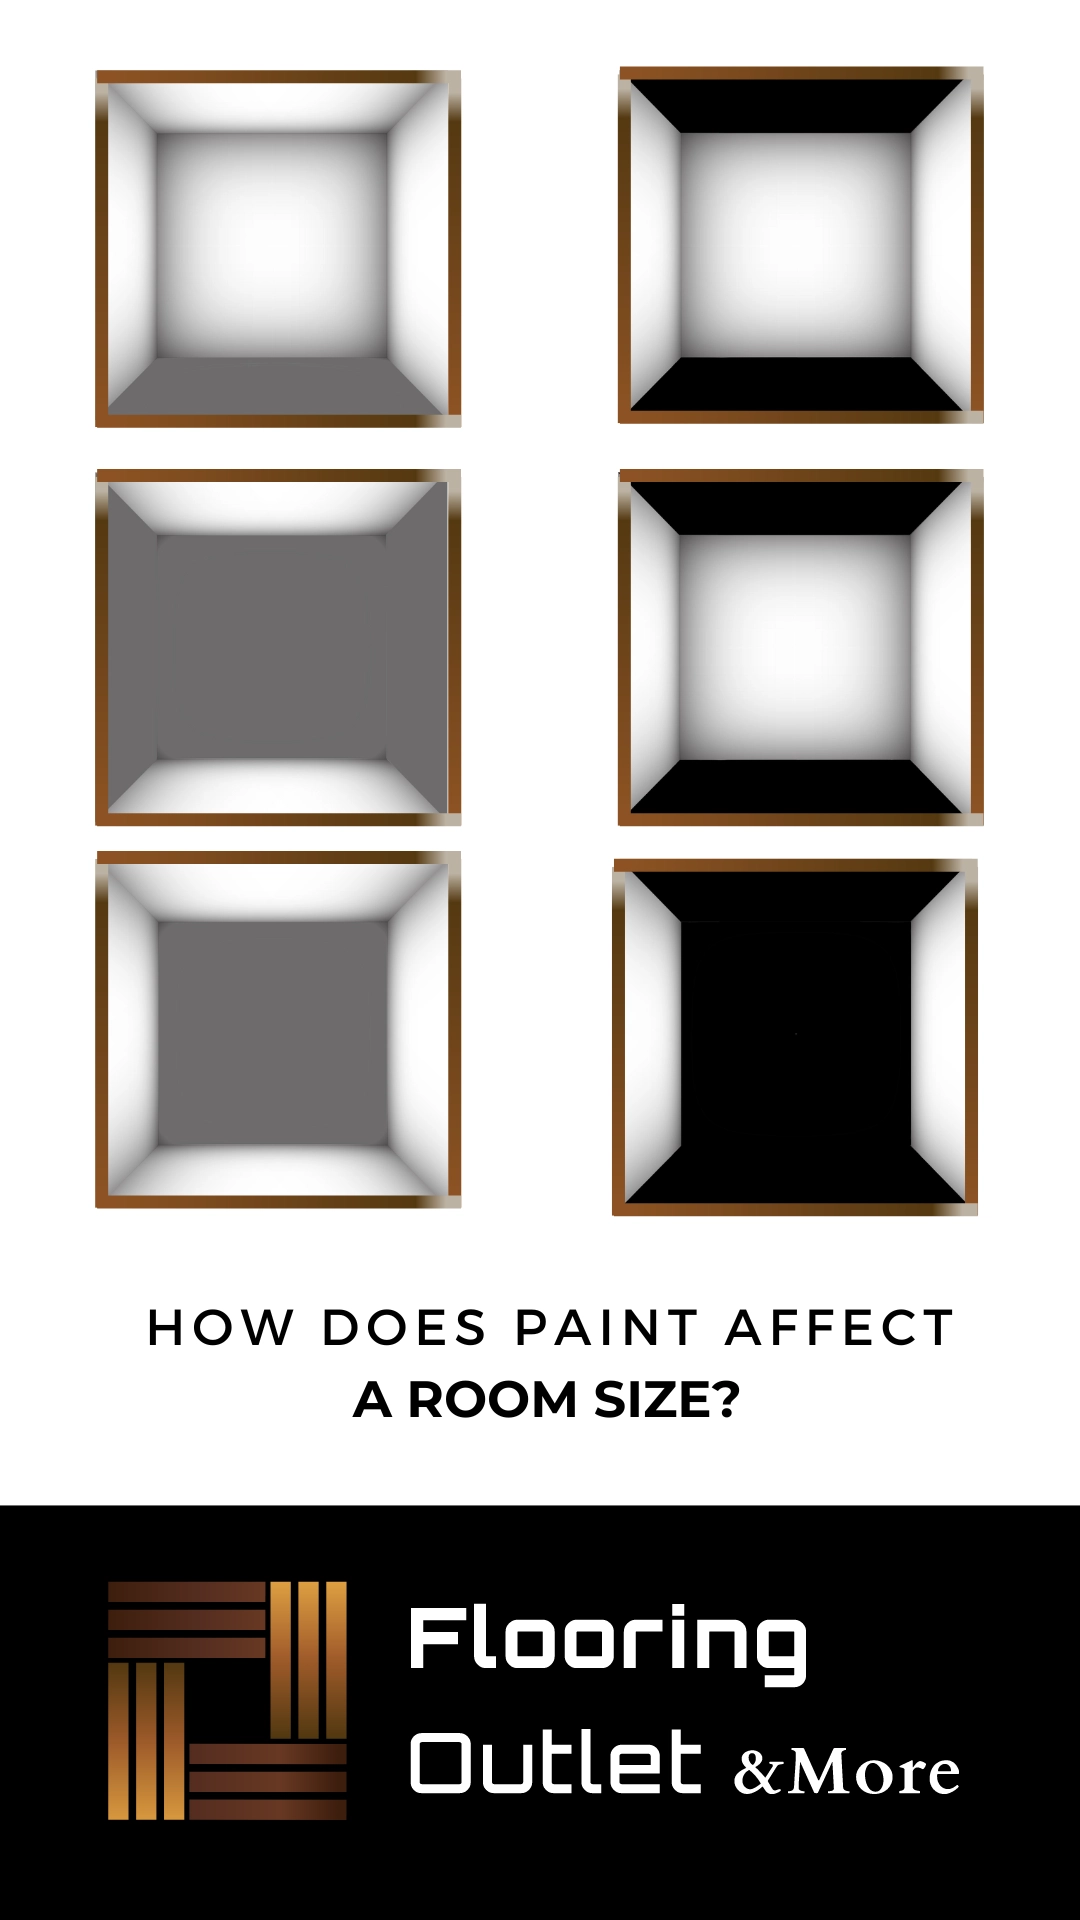 Paint Effects on Room Size